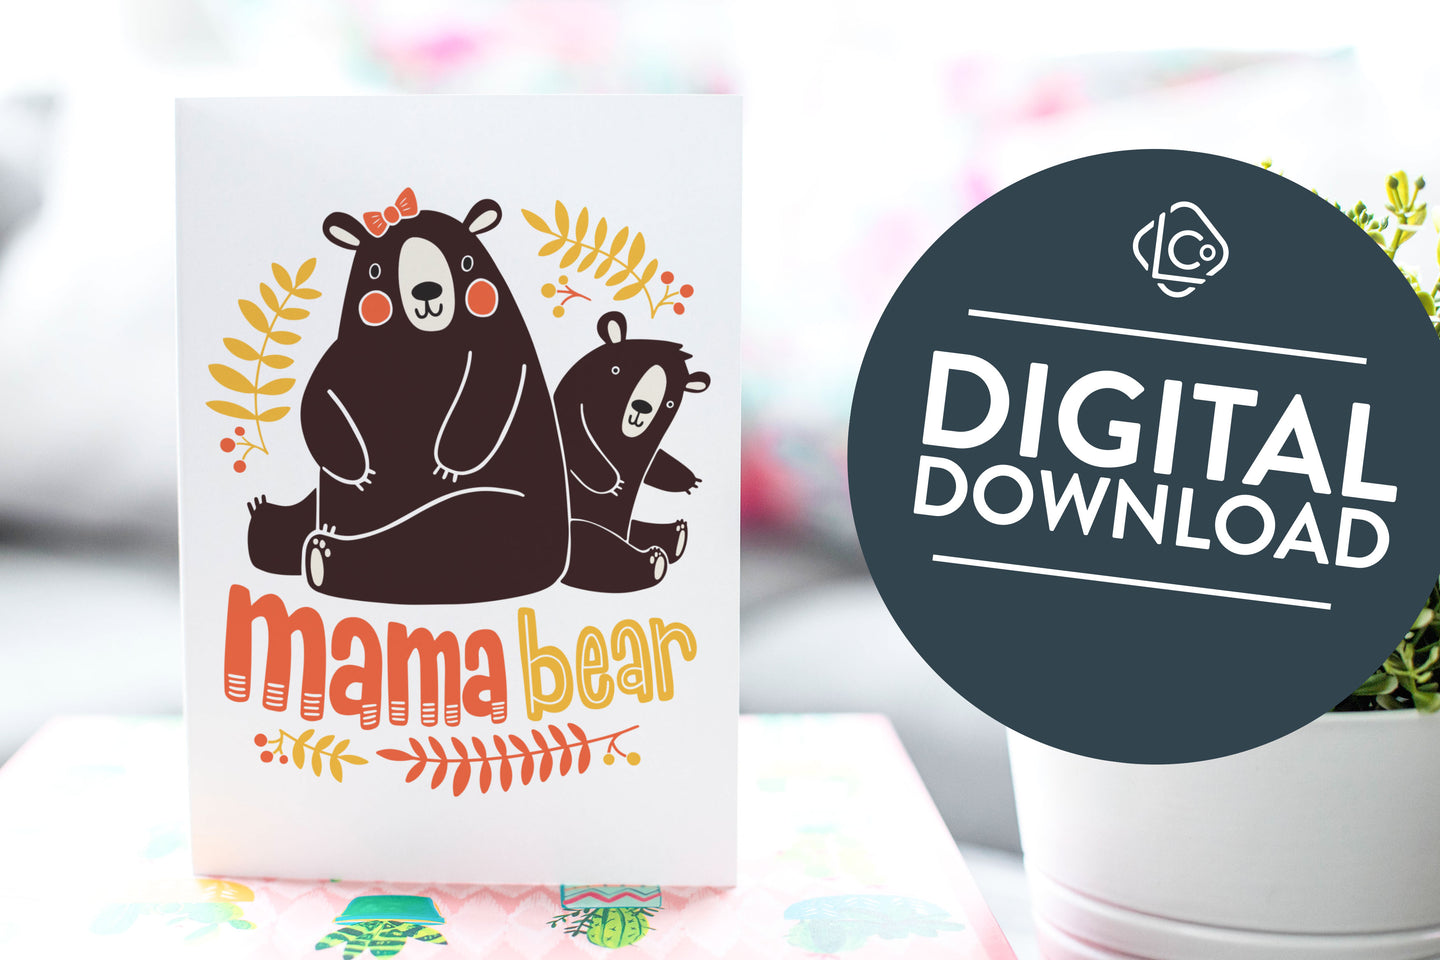 A greeting card is on a table top with a gift in pink wrapping paper. Next to the gift is a white plant pot with a green plant. The card features the words “Mama Bear” with an illustrated mama bear and baby bear. The words 